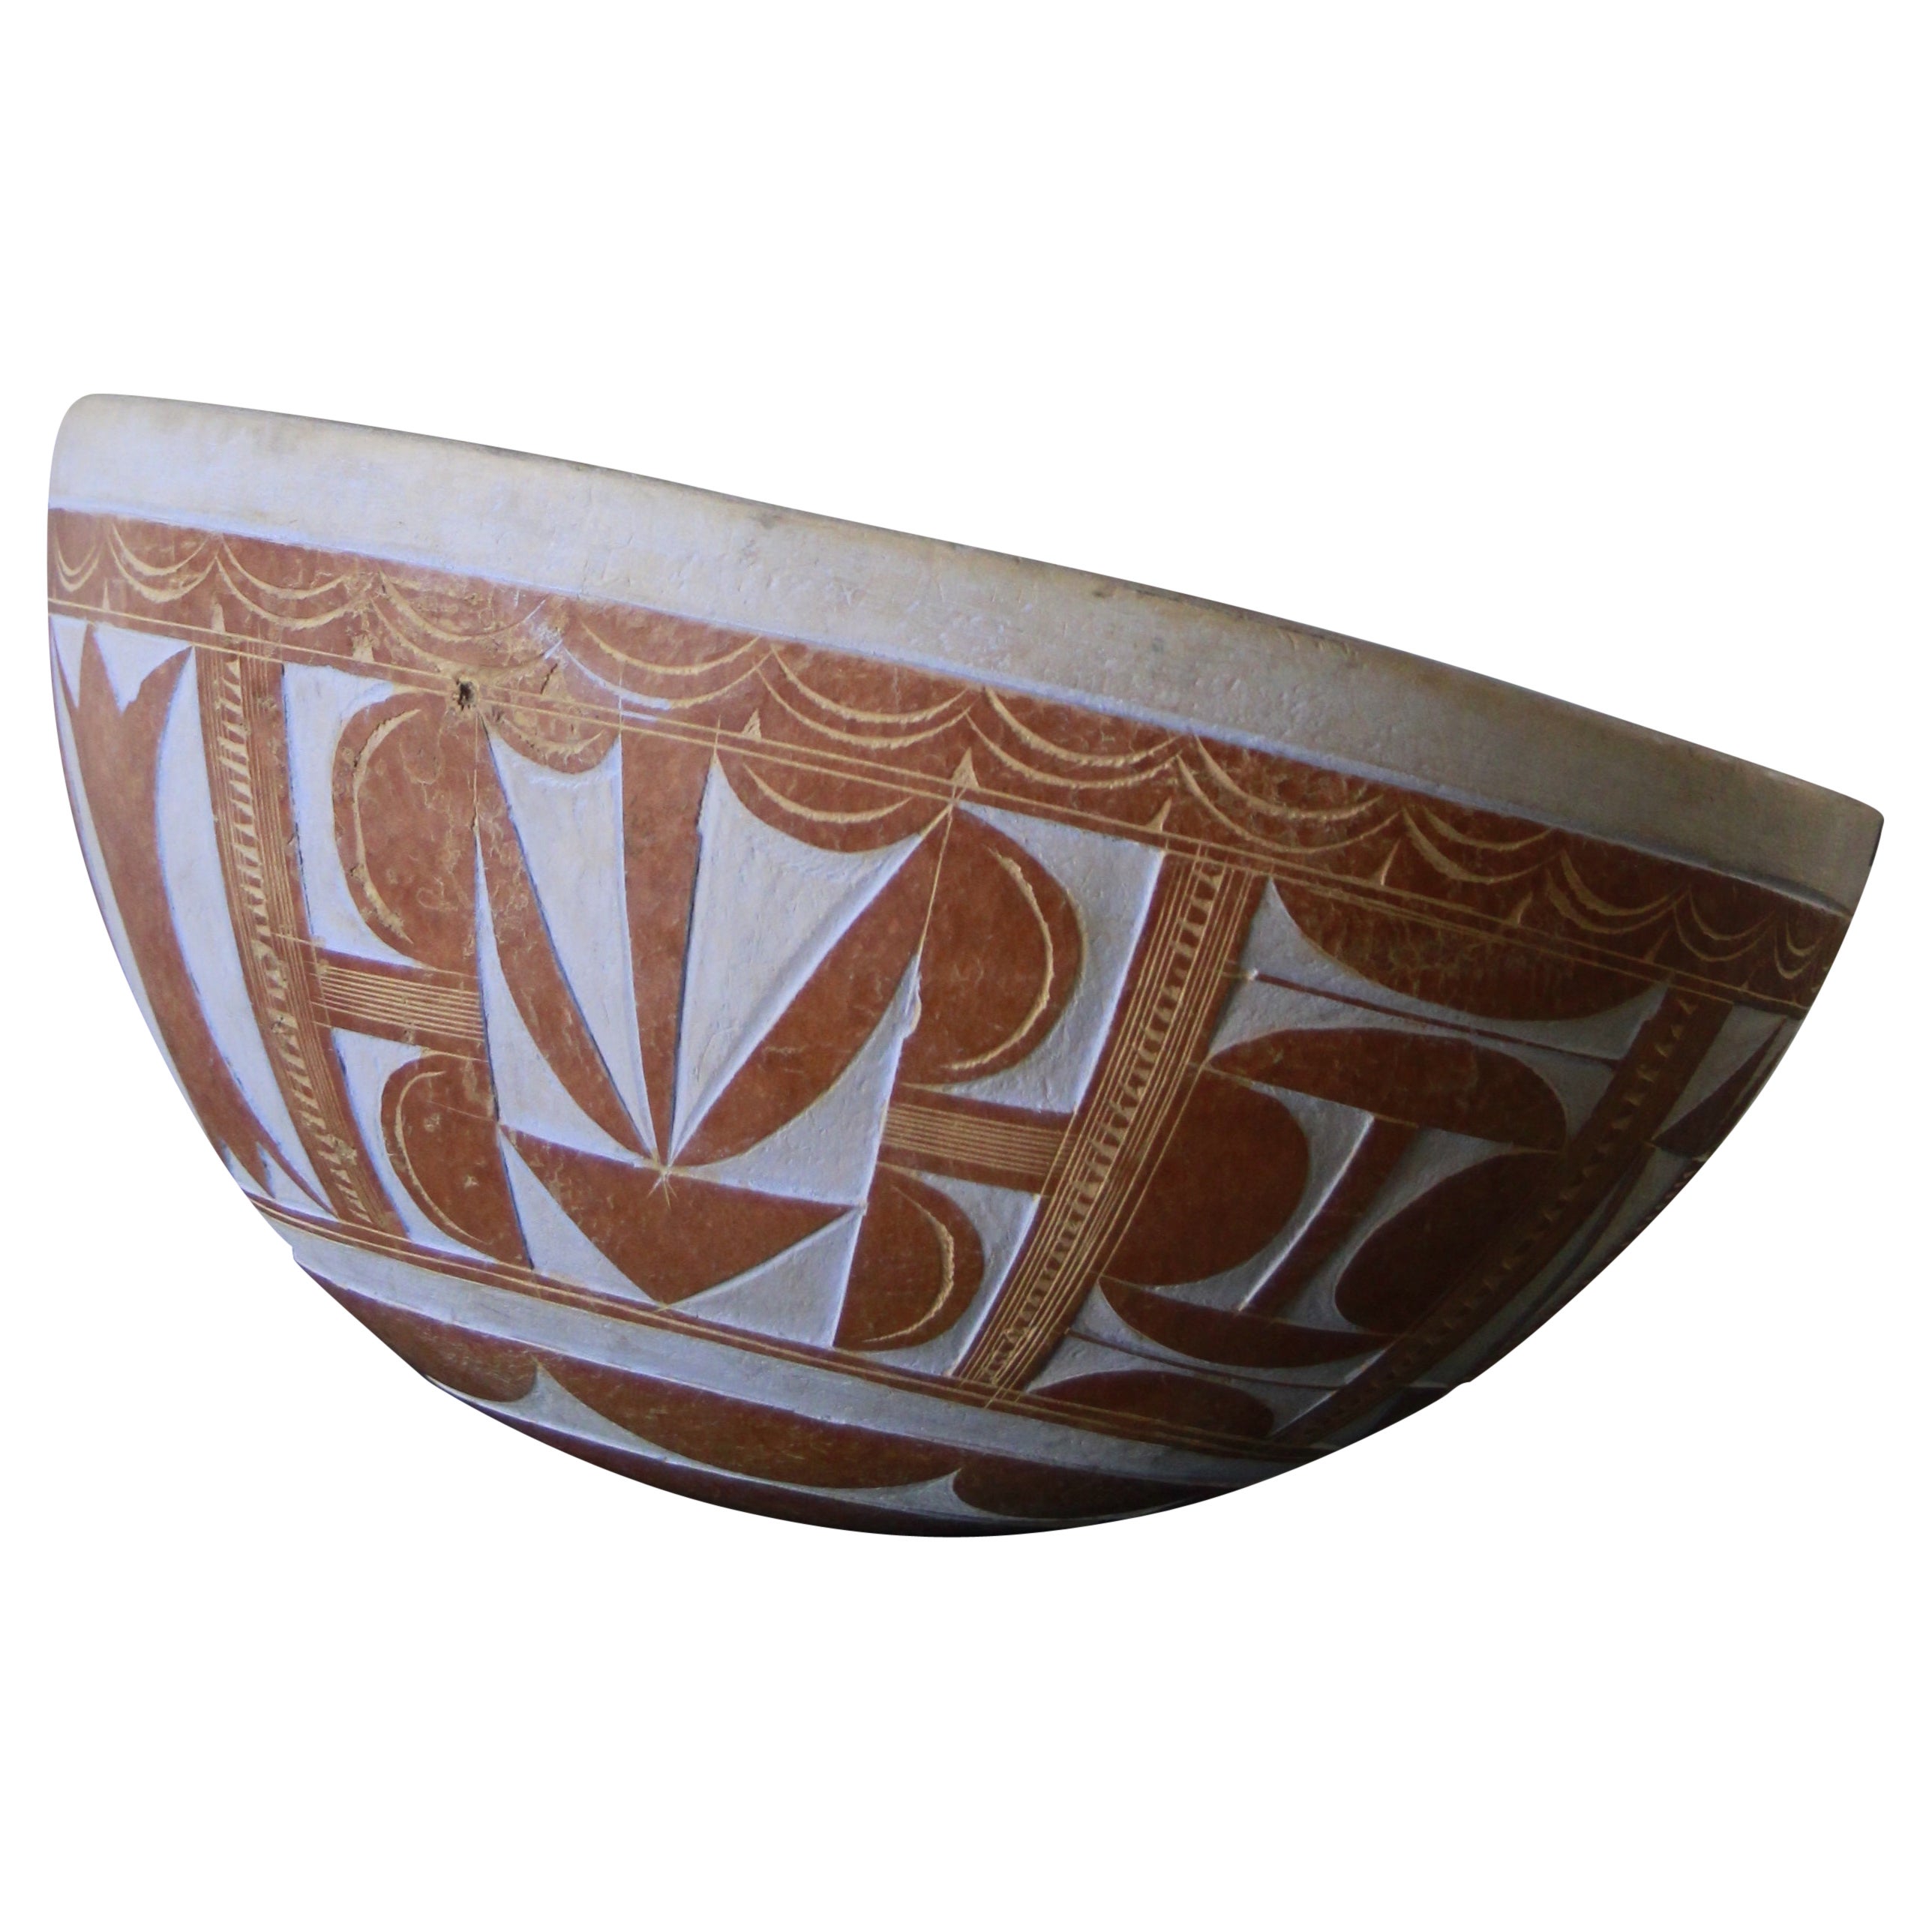 Vintage Hand-Crafted African Tribal Geometric Calabash Gourd Bowl #2 For Sale